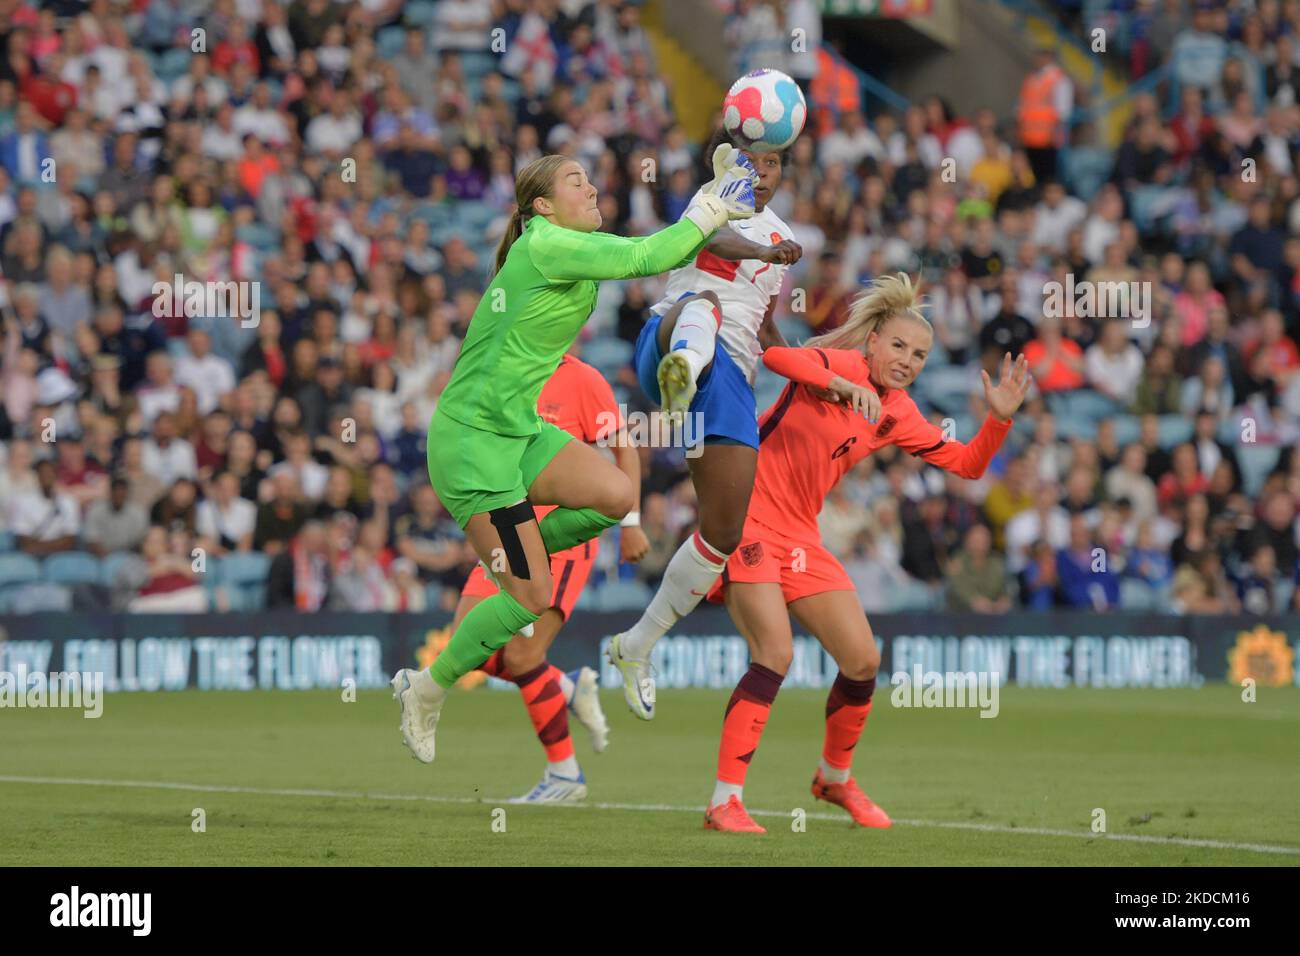 England's Mary Earps bravely come out for the. Ball while under pressure from Netherland's Lineth Beerensteyn during the International Friendly match between England Women and Netherlands at Elland Road, Leeds on Friday 24th June 2022. (Photo by Scott Llewellyn/MI News/NurPhoto) Stock Photo